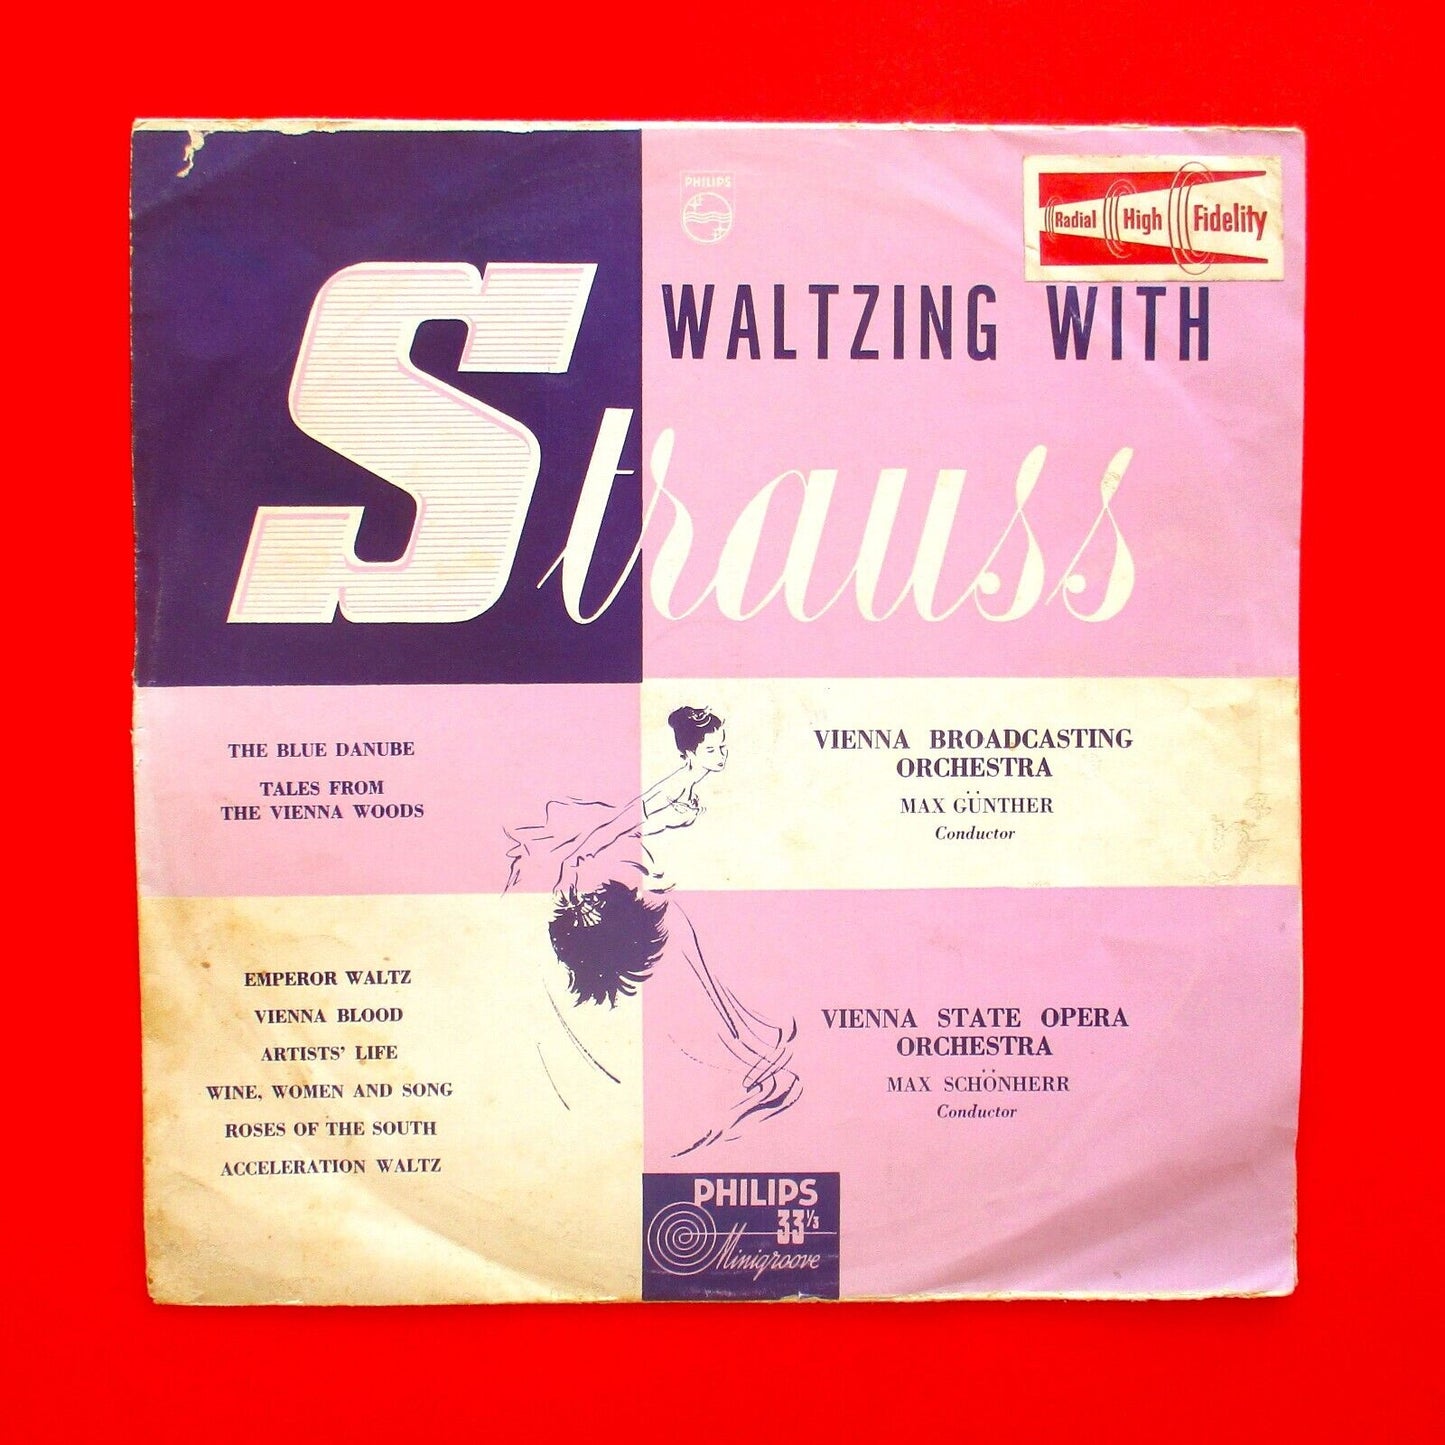 The Vienna Broadcasting Orchestra Waltzing With Strauss 10" Vinyl Australian